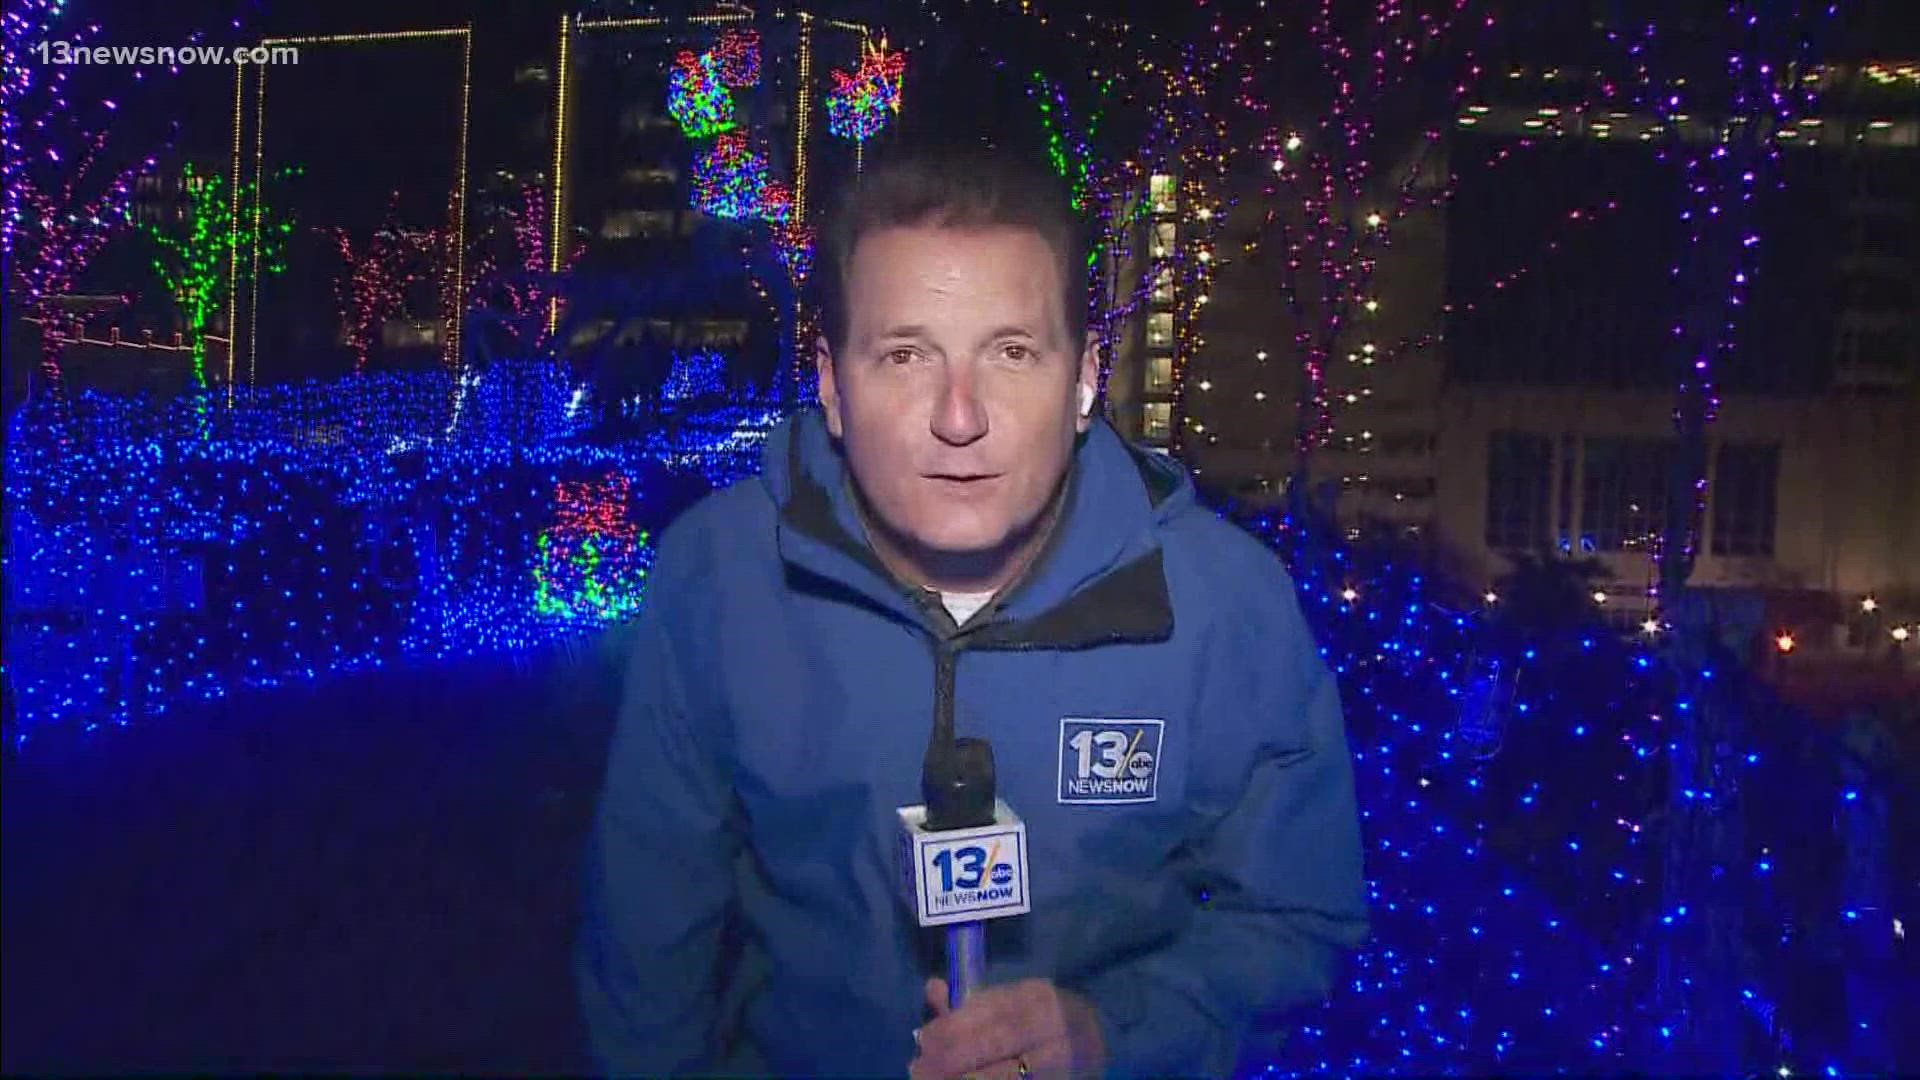 13News Now's Craig Moeller is taking a look at all of the festivities at 'WinterFest on the Wisconsin' in Norfolk.